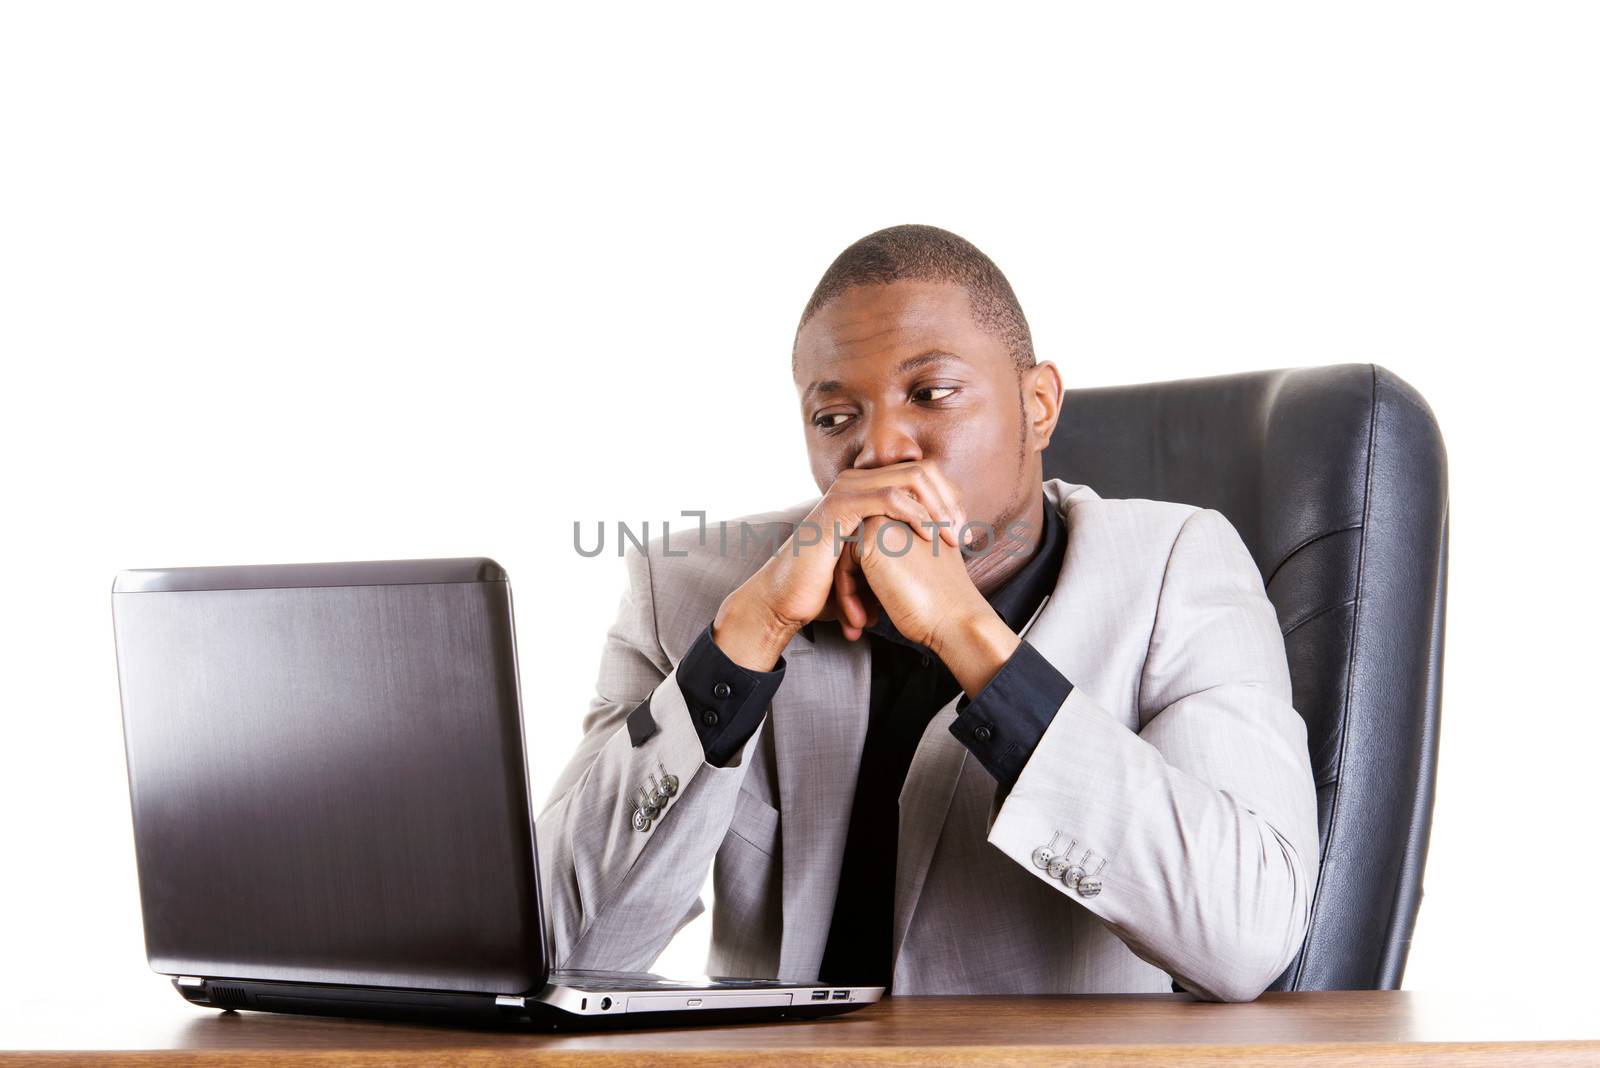 Stressed businessman working on laptop, isolated on white